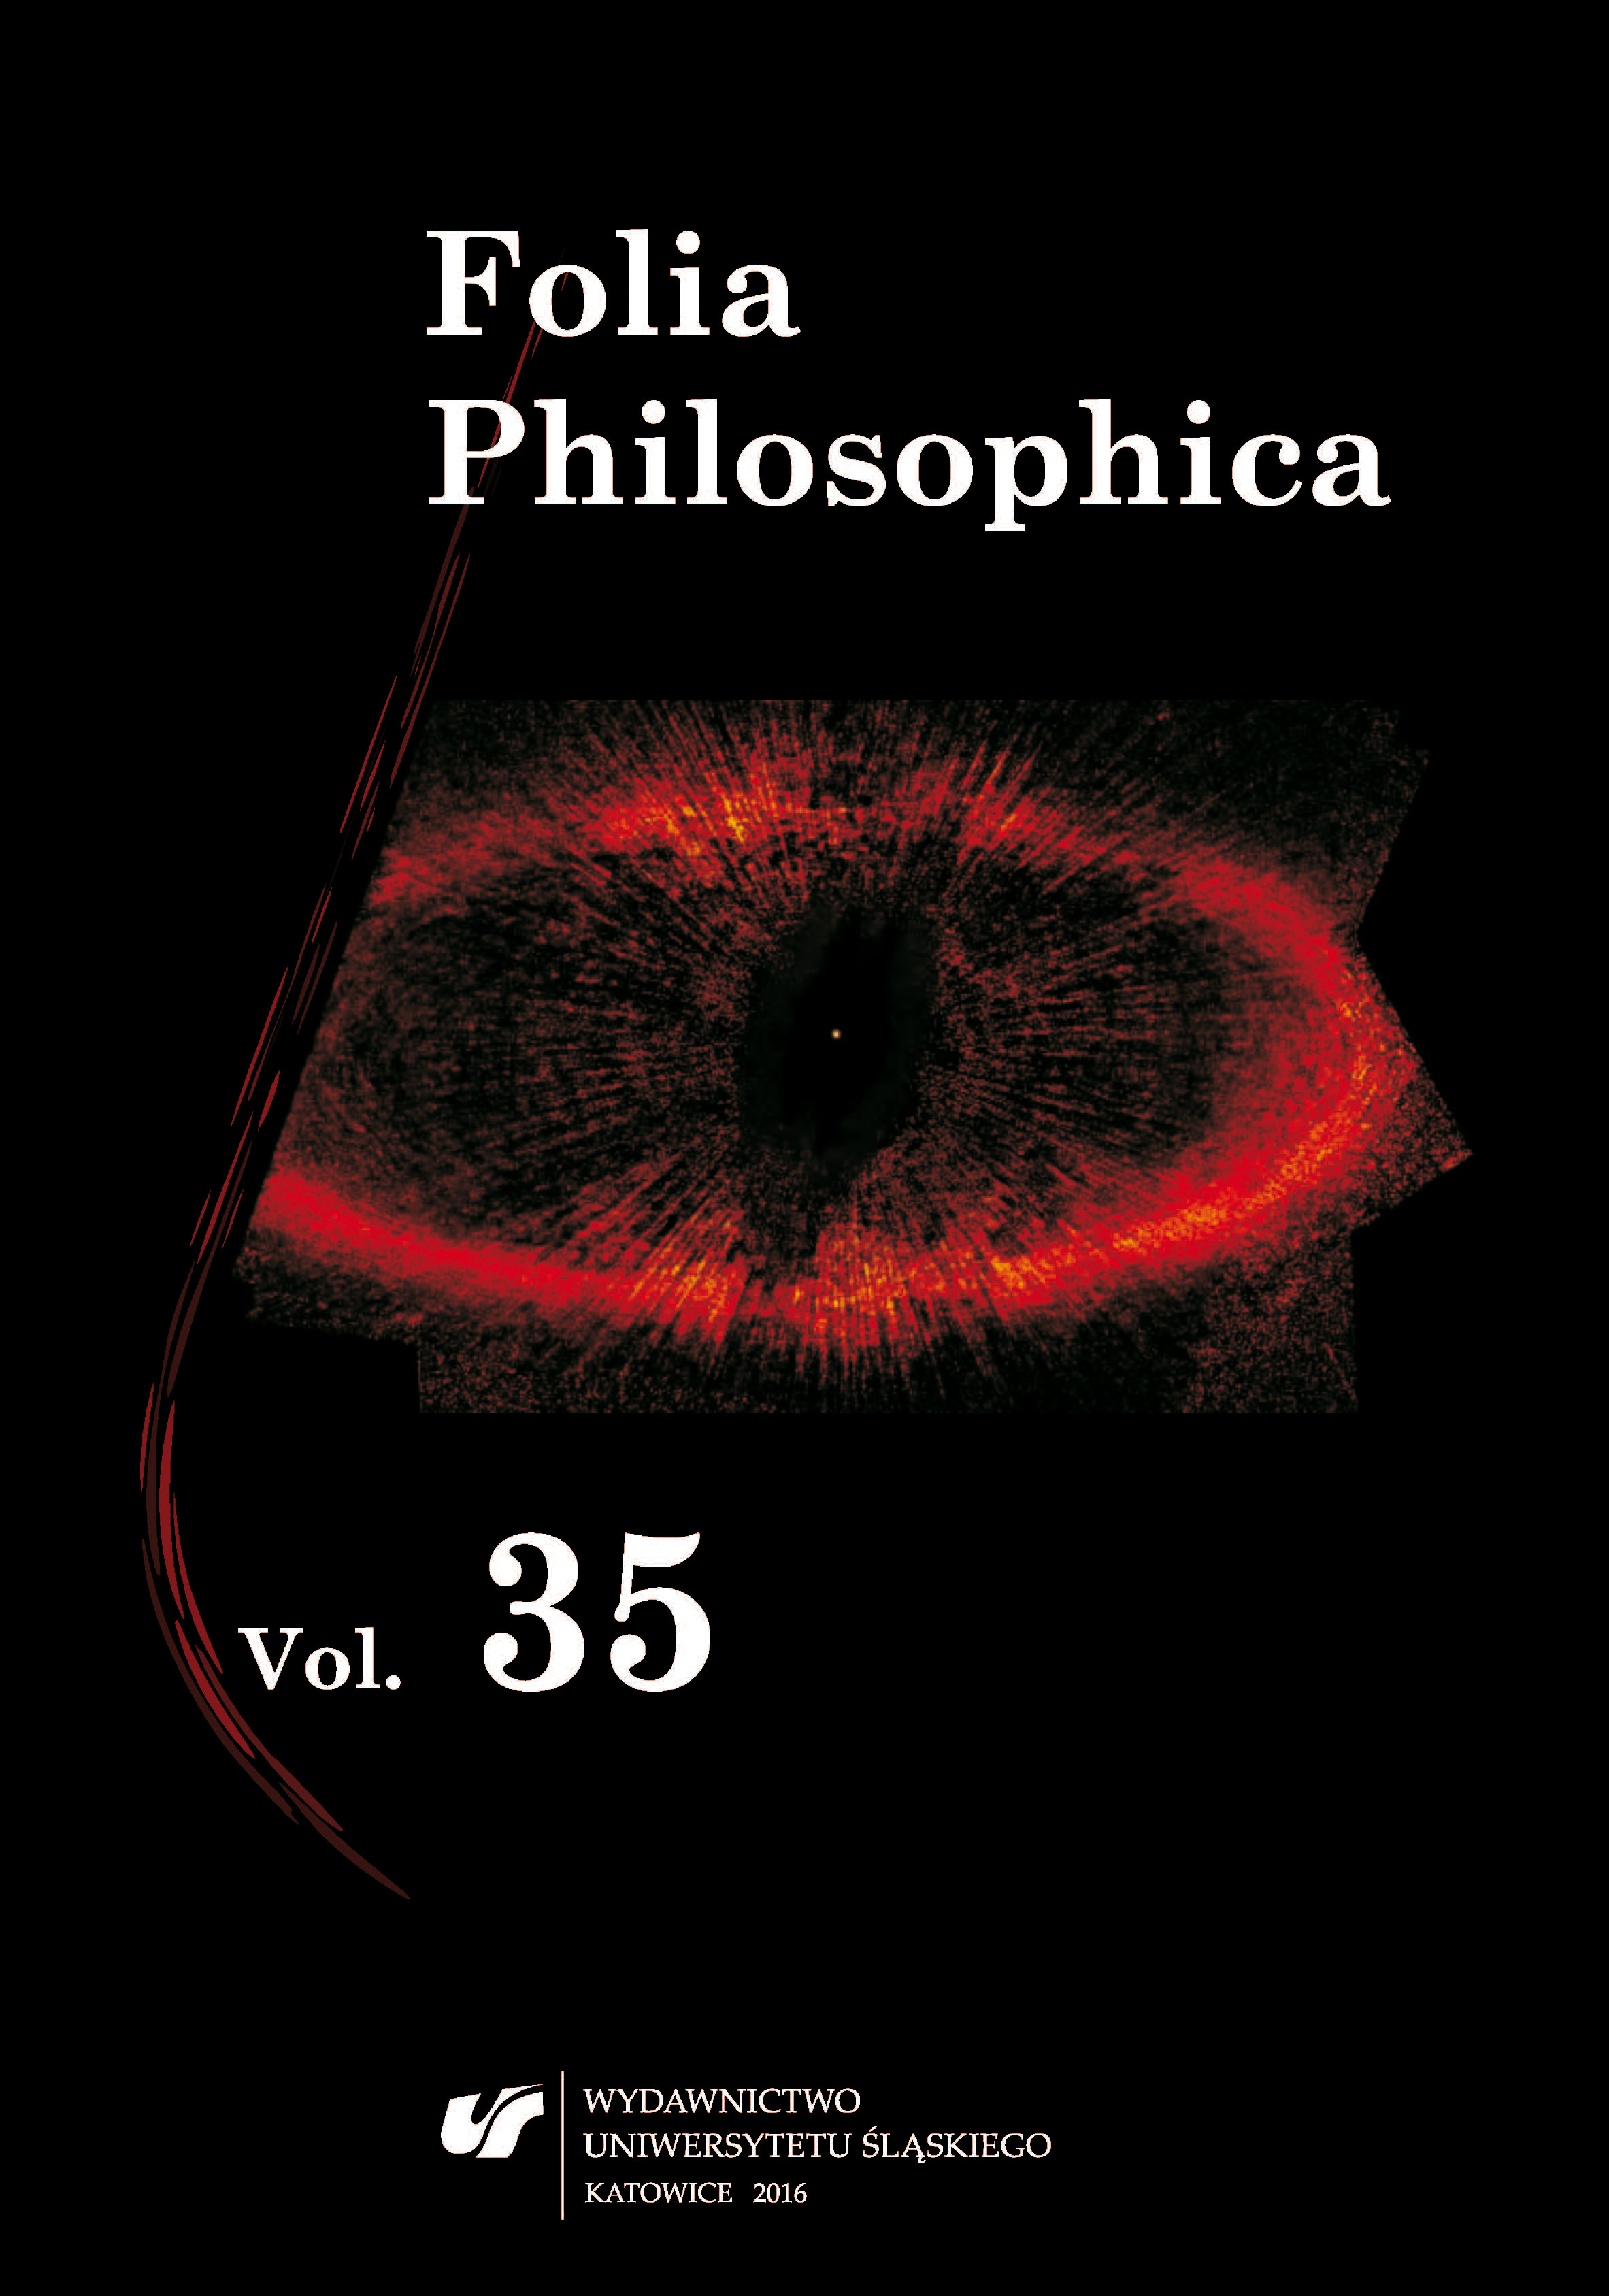 The polemic between Leonard Nelson and Ernst Cassirer on the critical method in the philosophy Cover Image